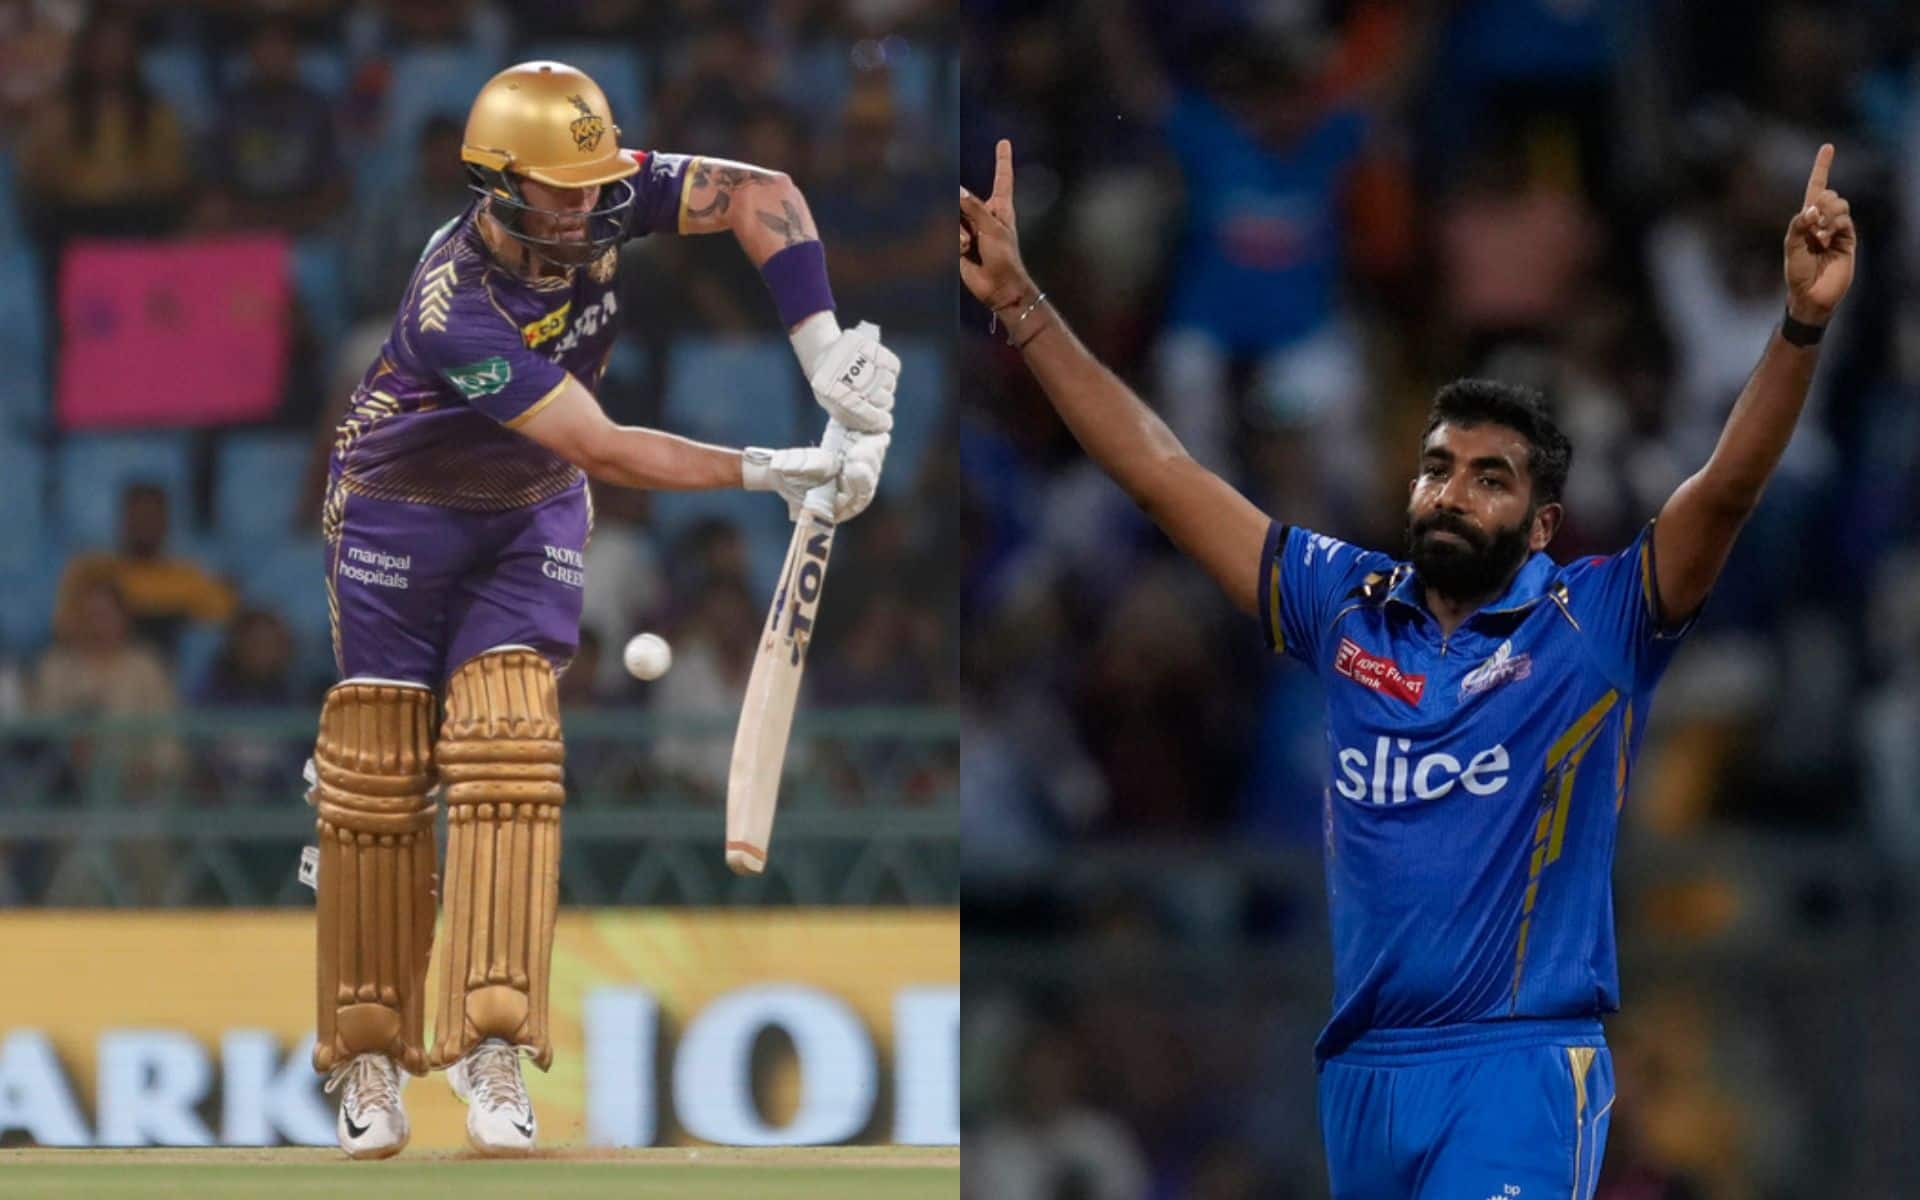 Phil Salt and Jasprit Bumrah will play crucial roles for their teams in the match [AP Photos]